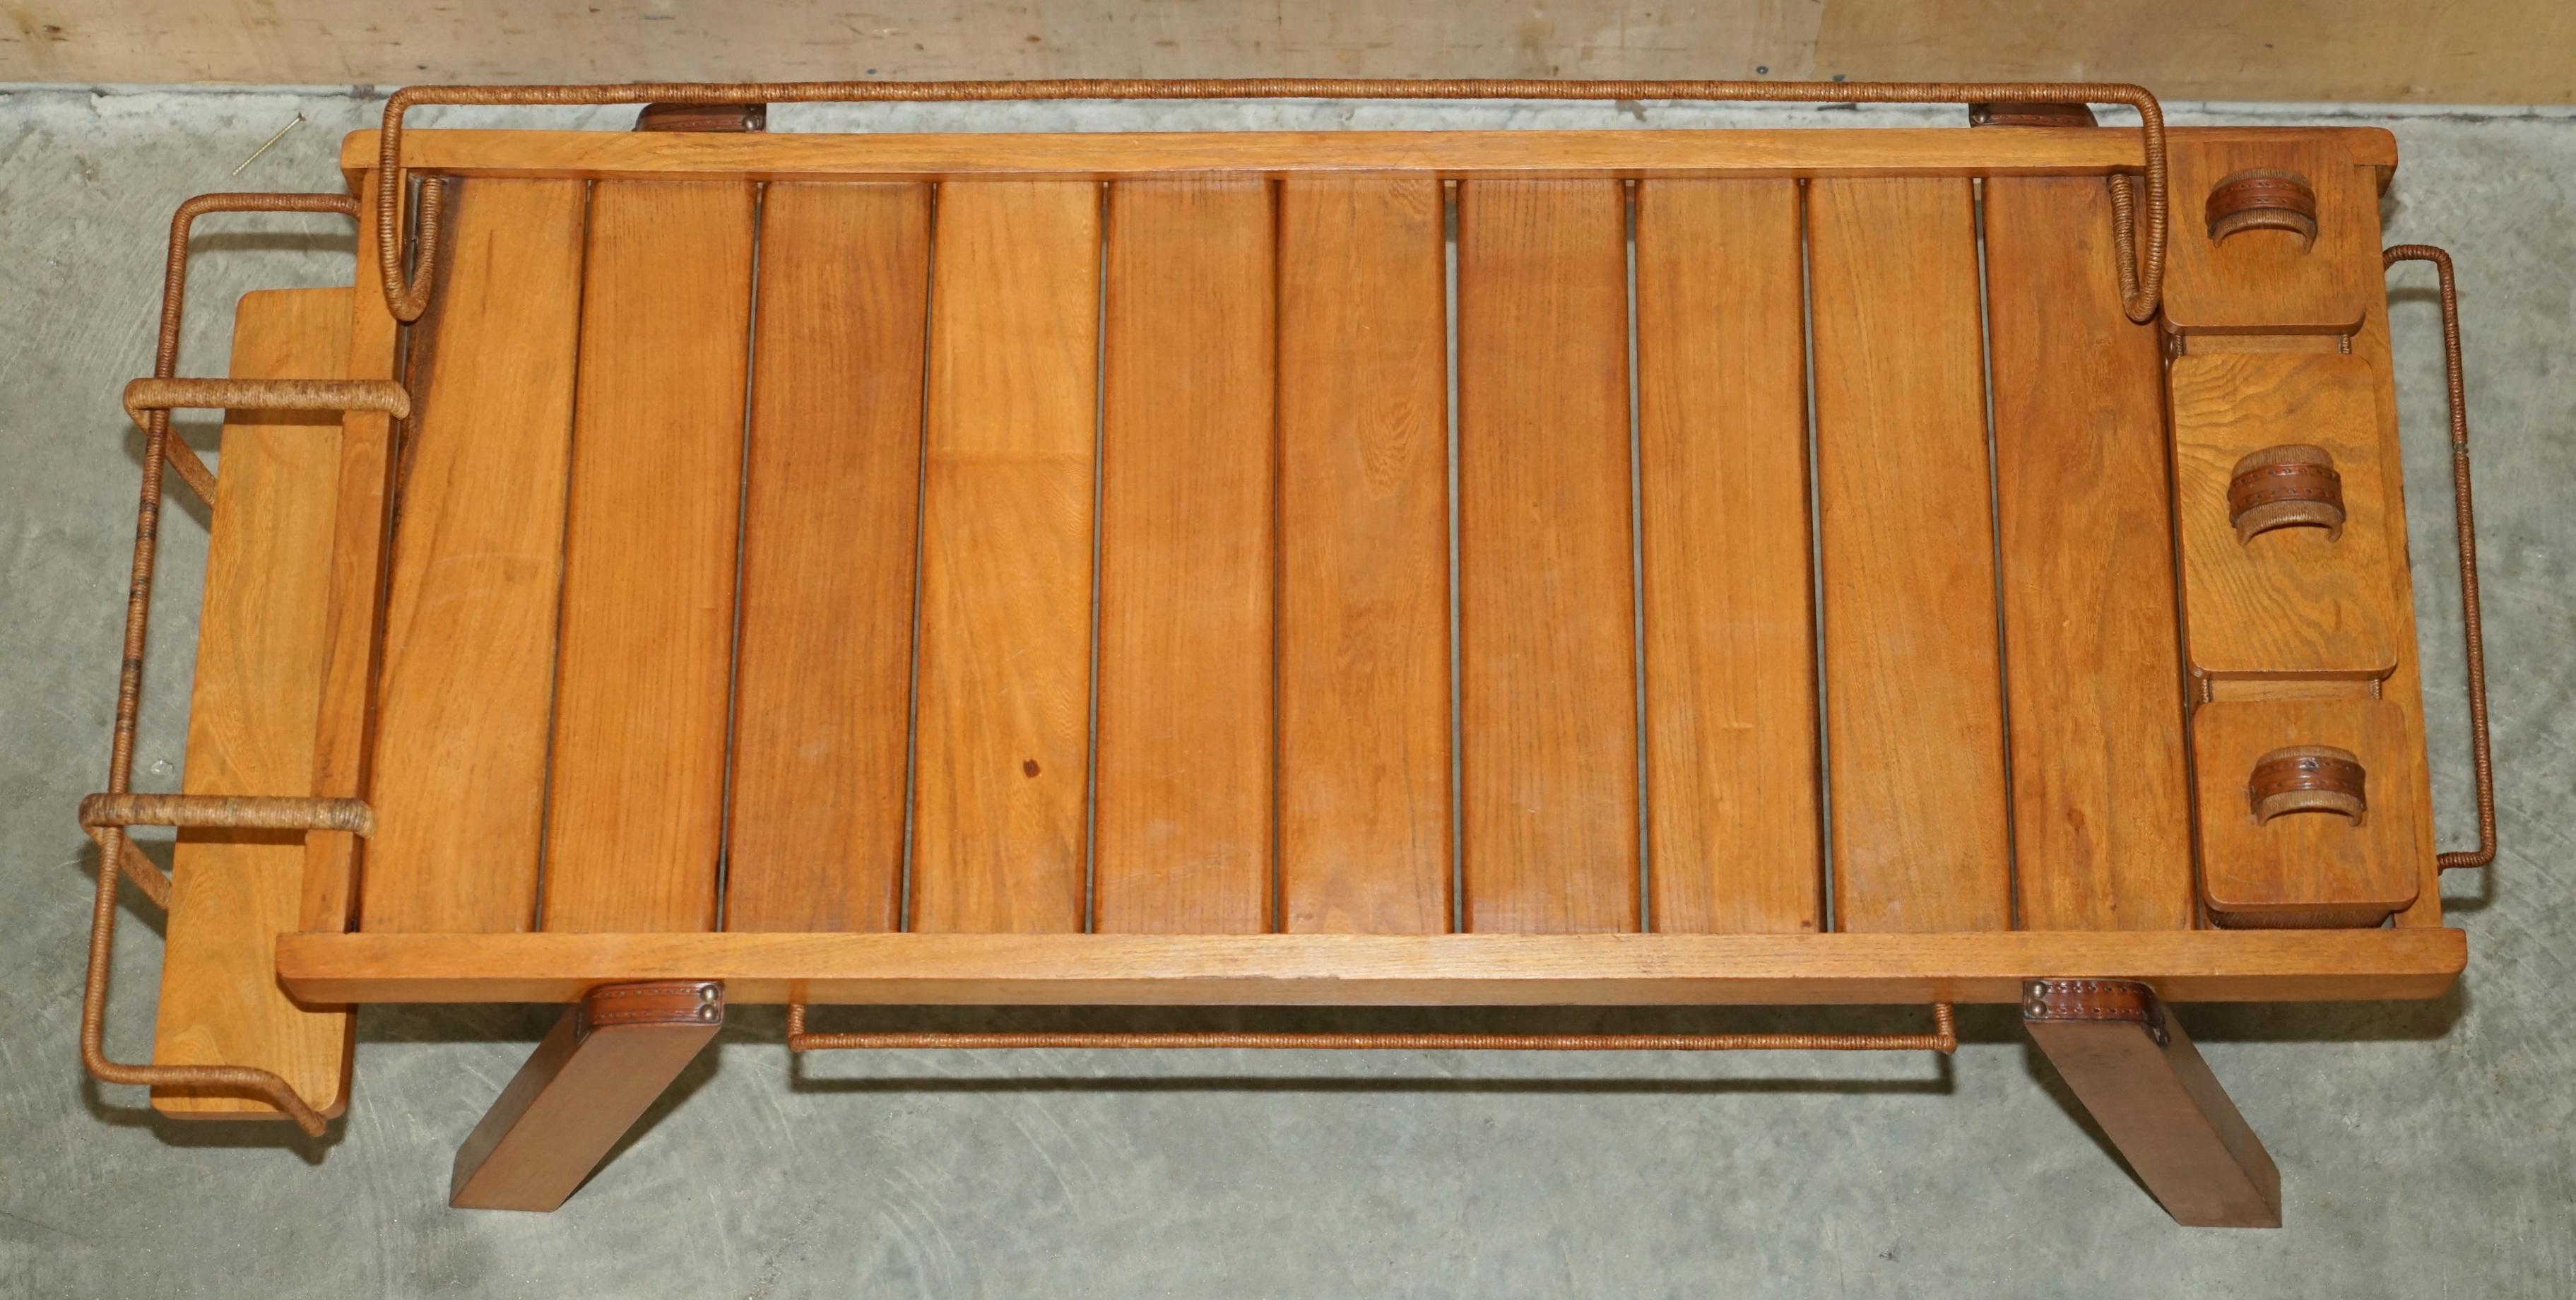 JACQUES ADNET 1940'S MID CENTURY MODERN SOLID ELM STITCHED LEATHER COFFEE TABLe For Sale 4